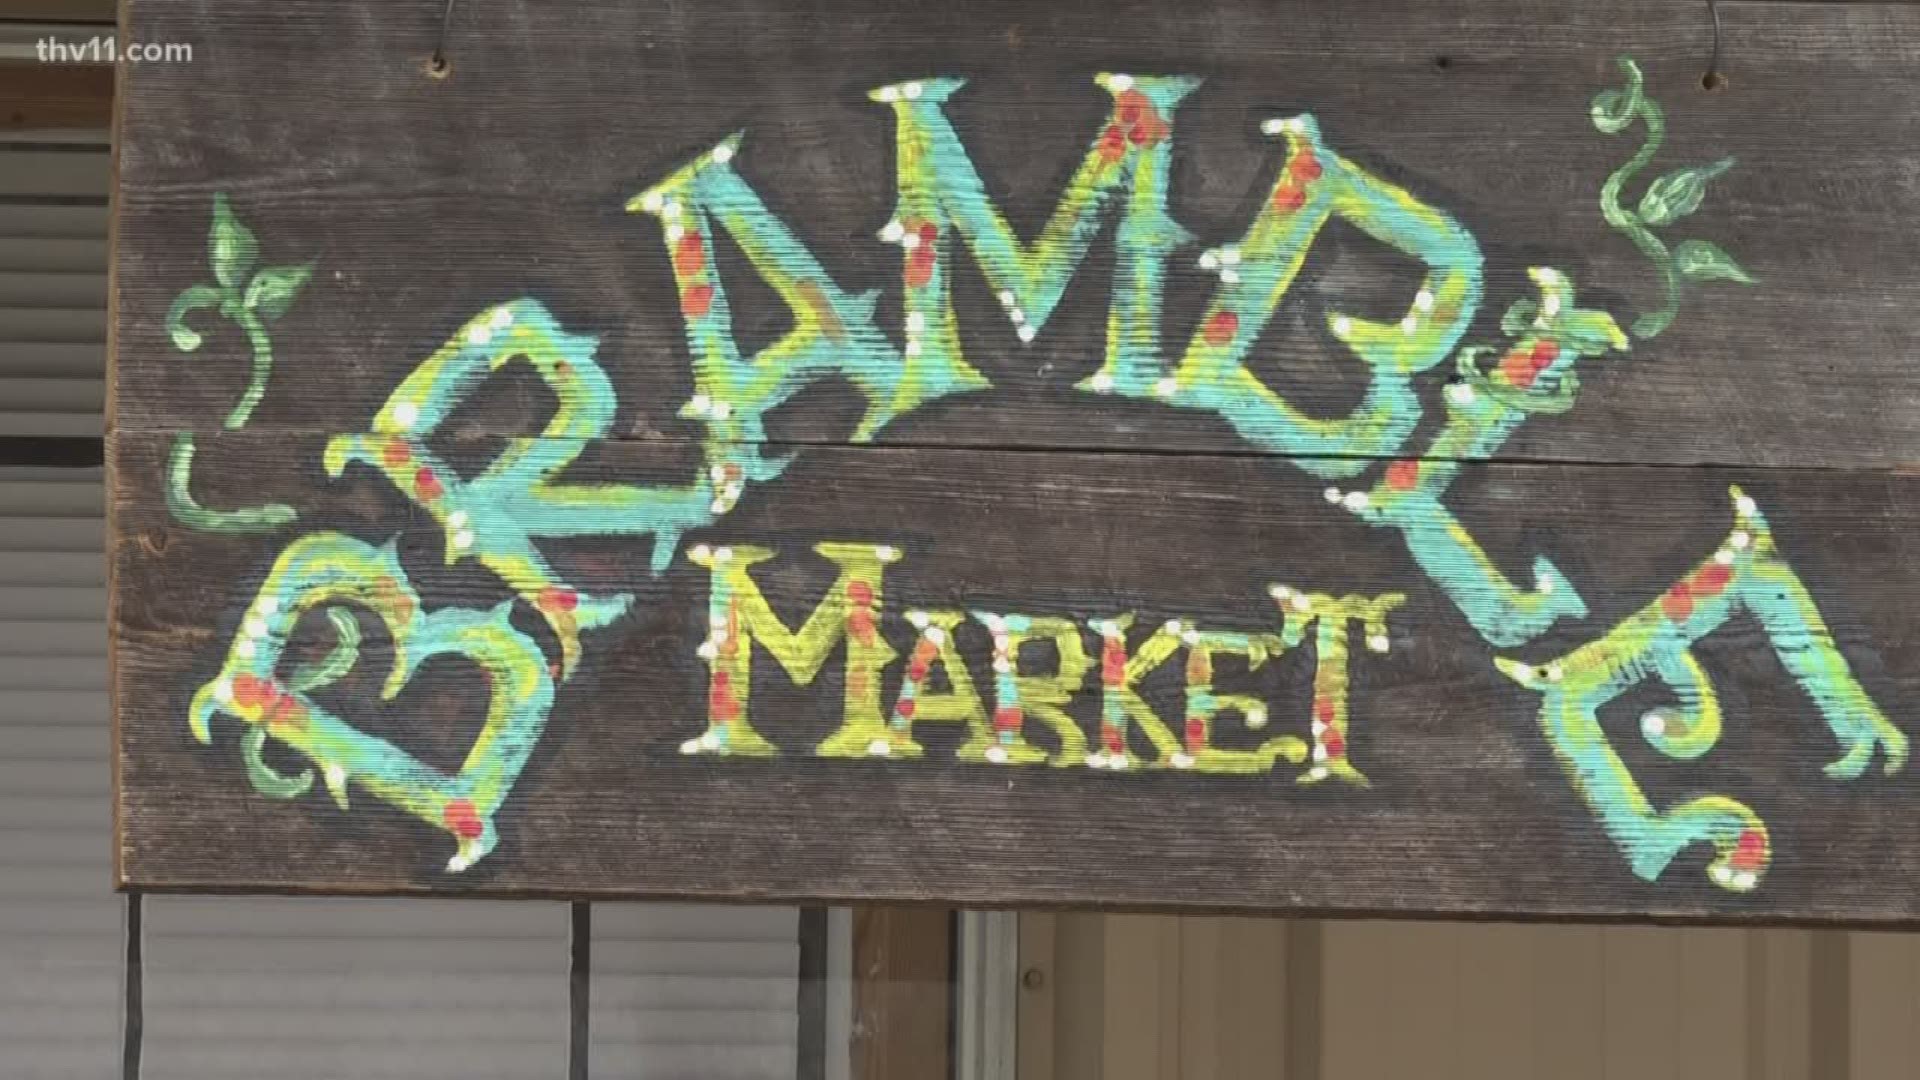 Just west of Little Rock on Highway 10, Bramble Market is growing a foothold.